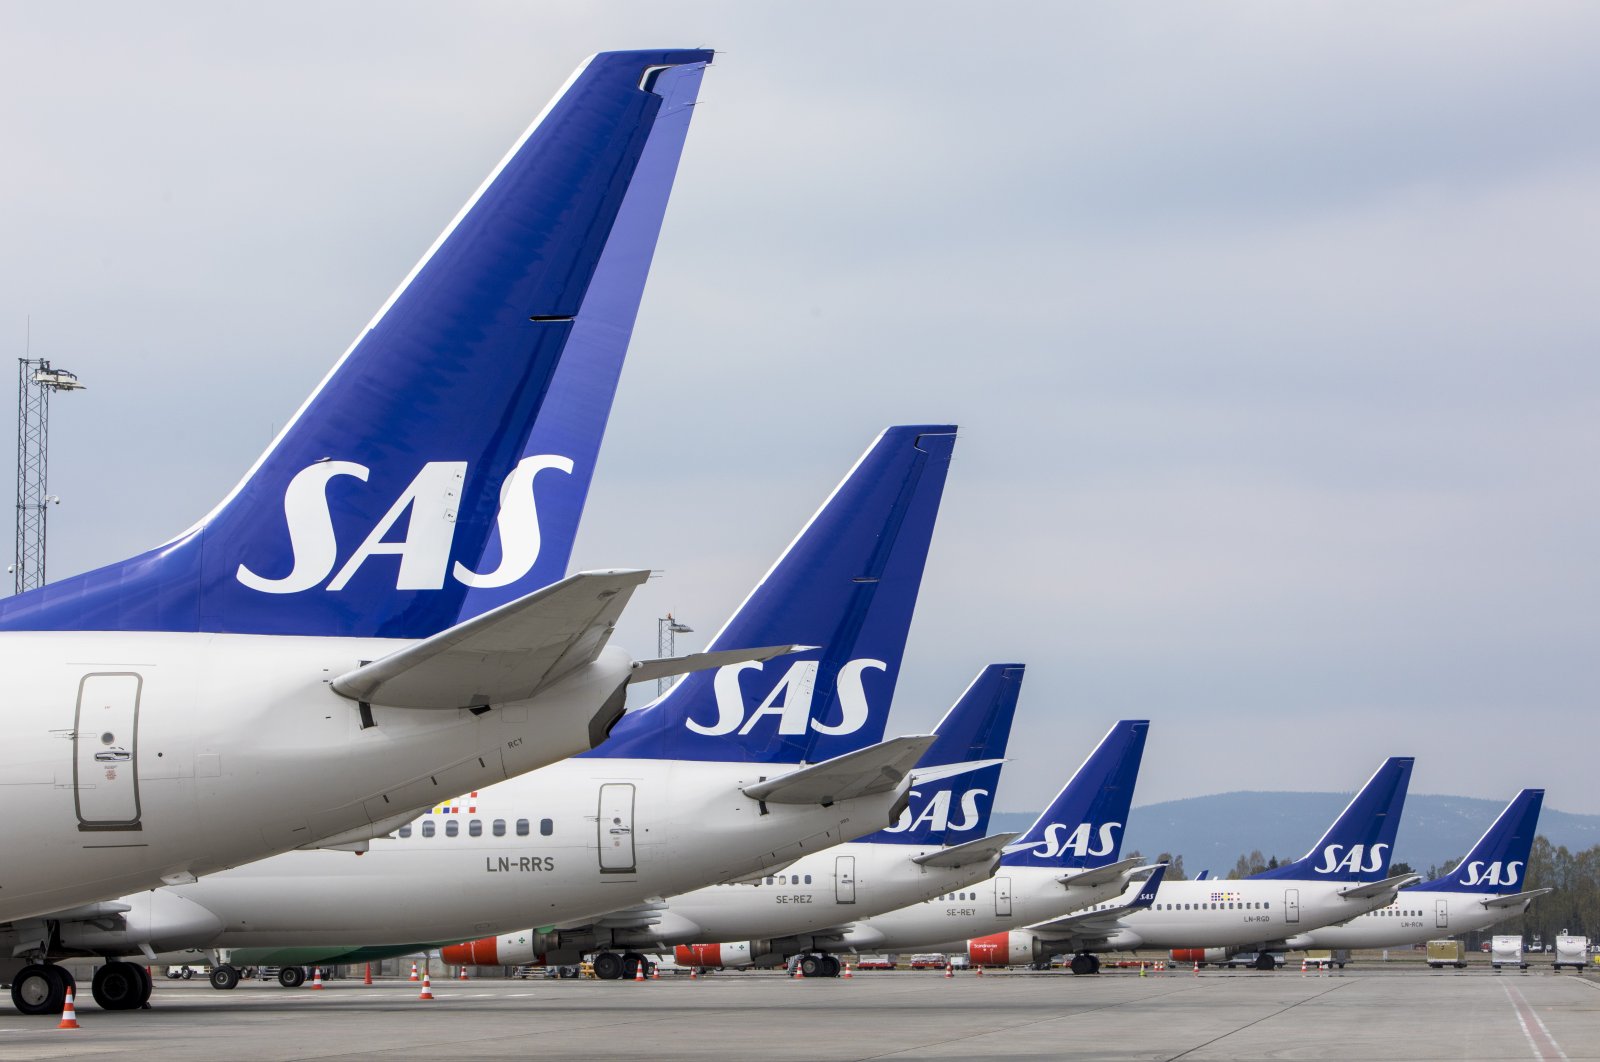 SAS planes are grounded at Oslo Gardermoen airport during pilots strikes, in Oslo, April 26, 2019 file photo. (NTB Scanpix via AP)